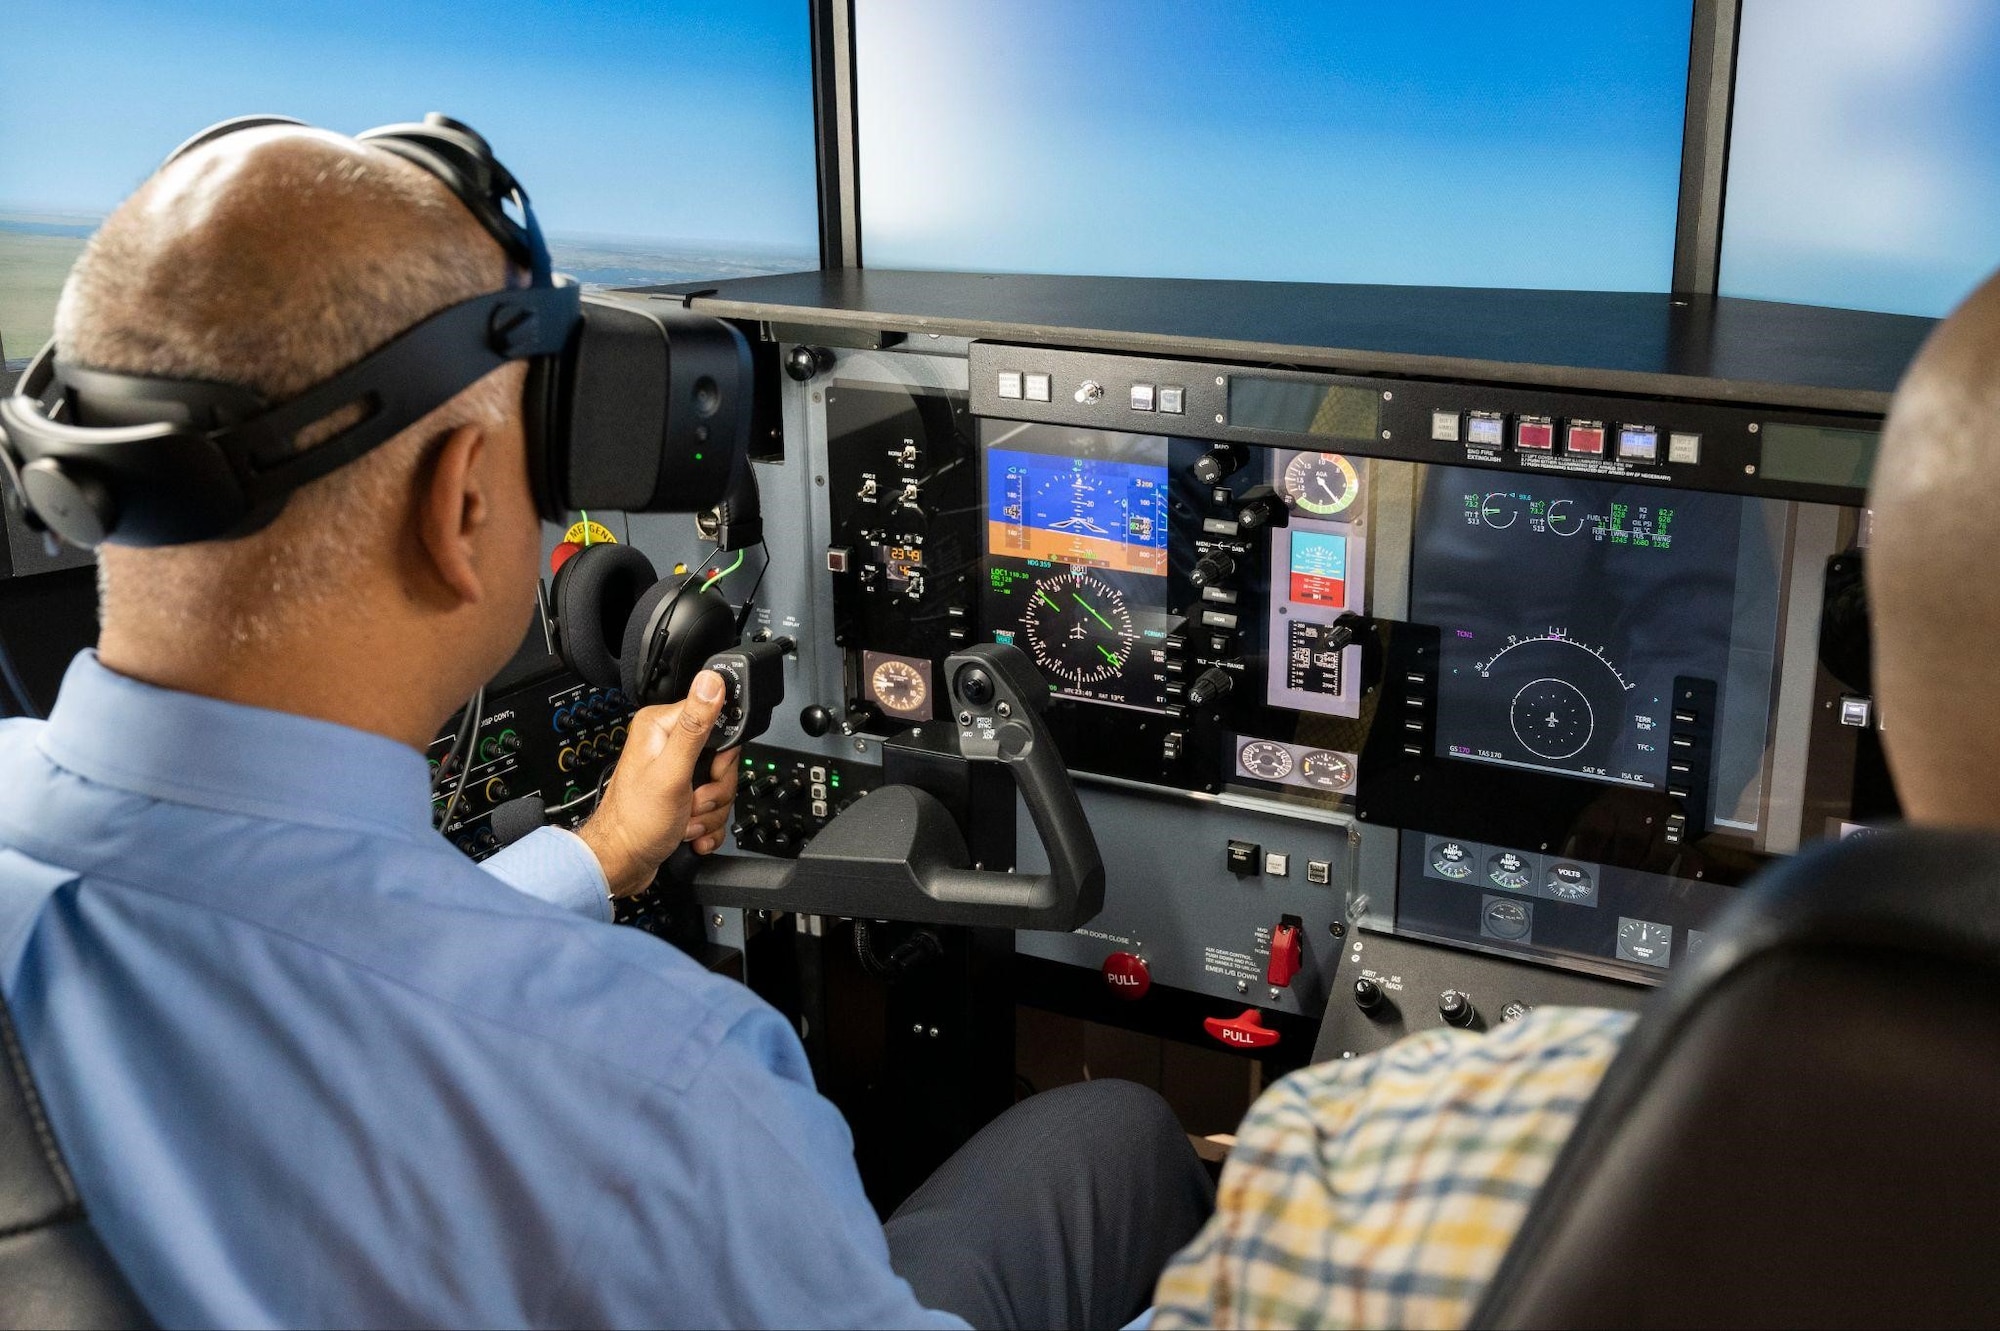 The Hon. Ravi Chaudhary, Assistant Secretary of the Air Force for Energy, Installations, and Environment, flies in a T-1A Jayhawk simulator at Laughlin Air Force Base, Texas, on May 31, 2023. (U.S. Air Force photo by Airman 1st Class Kailee Reynolds)